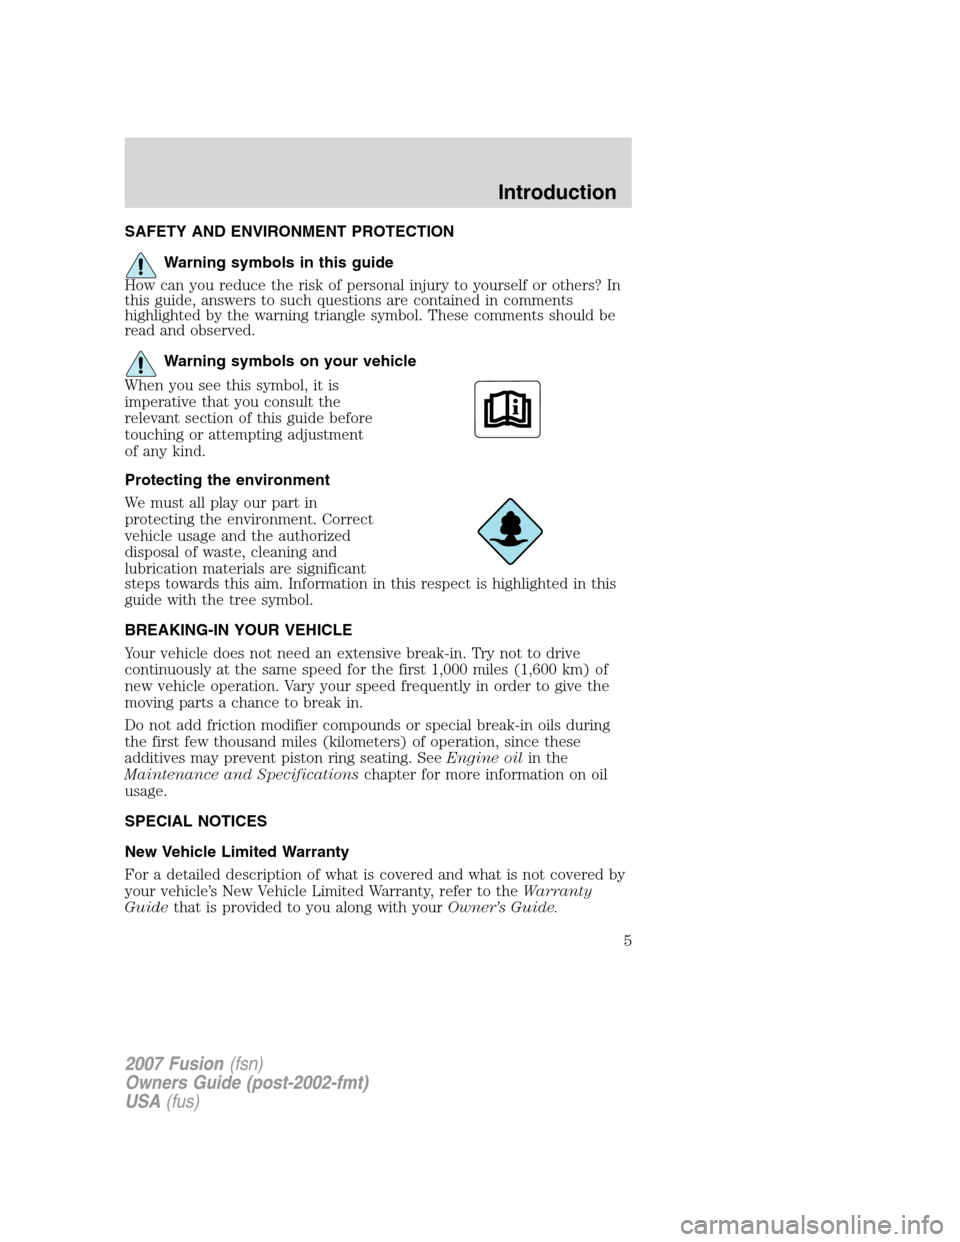 FORD FUSION (AMERICAS) 2007 1.G Owners Manual SAFETY AND ENVIRONMENT PROTECTION
Warning symbols in this guide
How can you reduce the risk of personal injury to yourself or others? In
this guide, answers to such questions are contained in comments